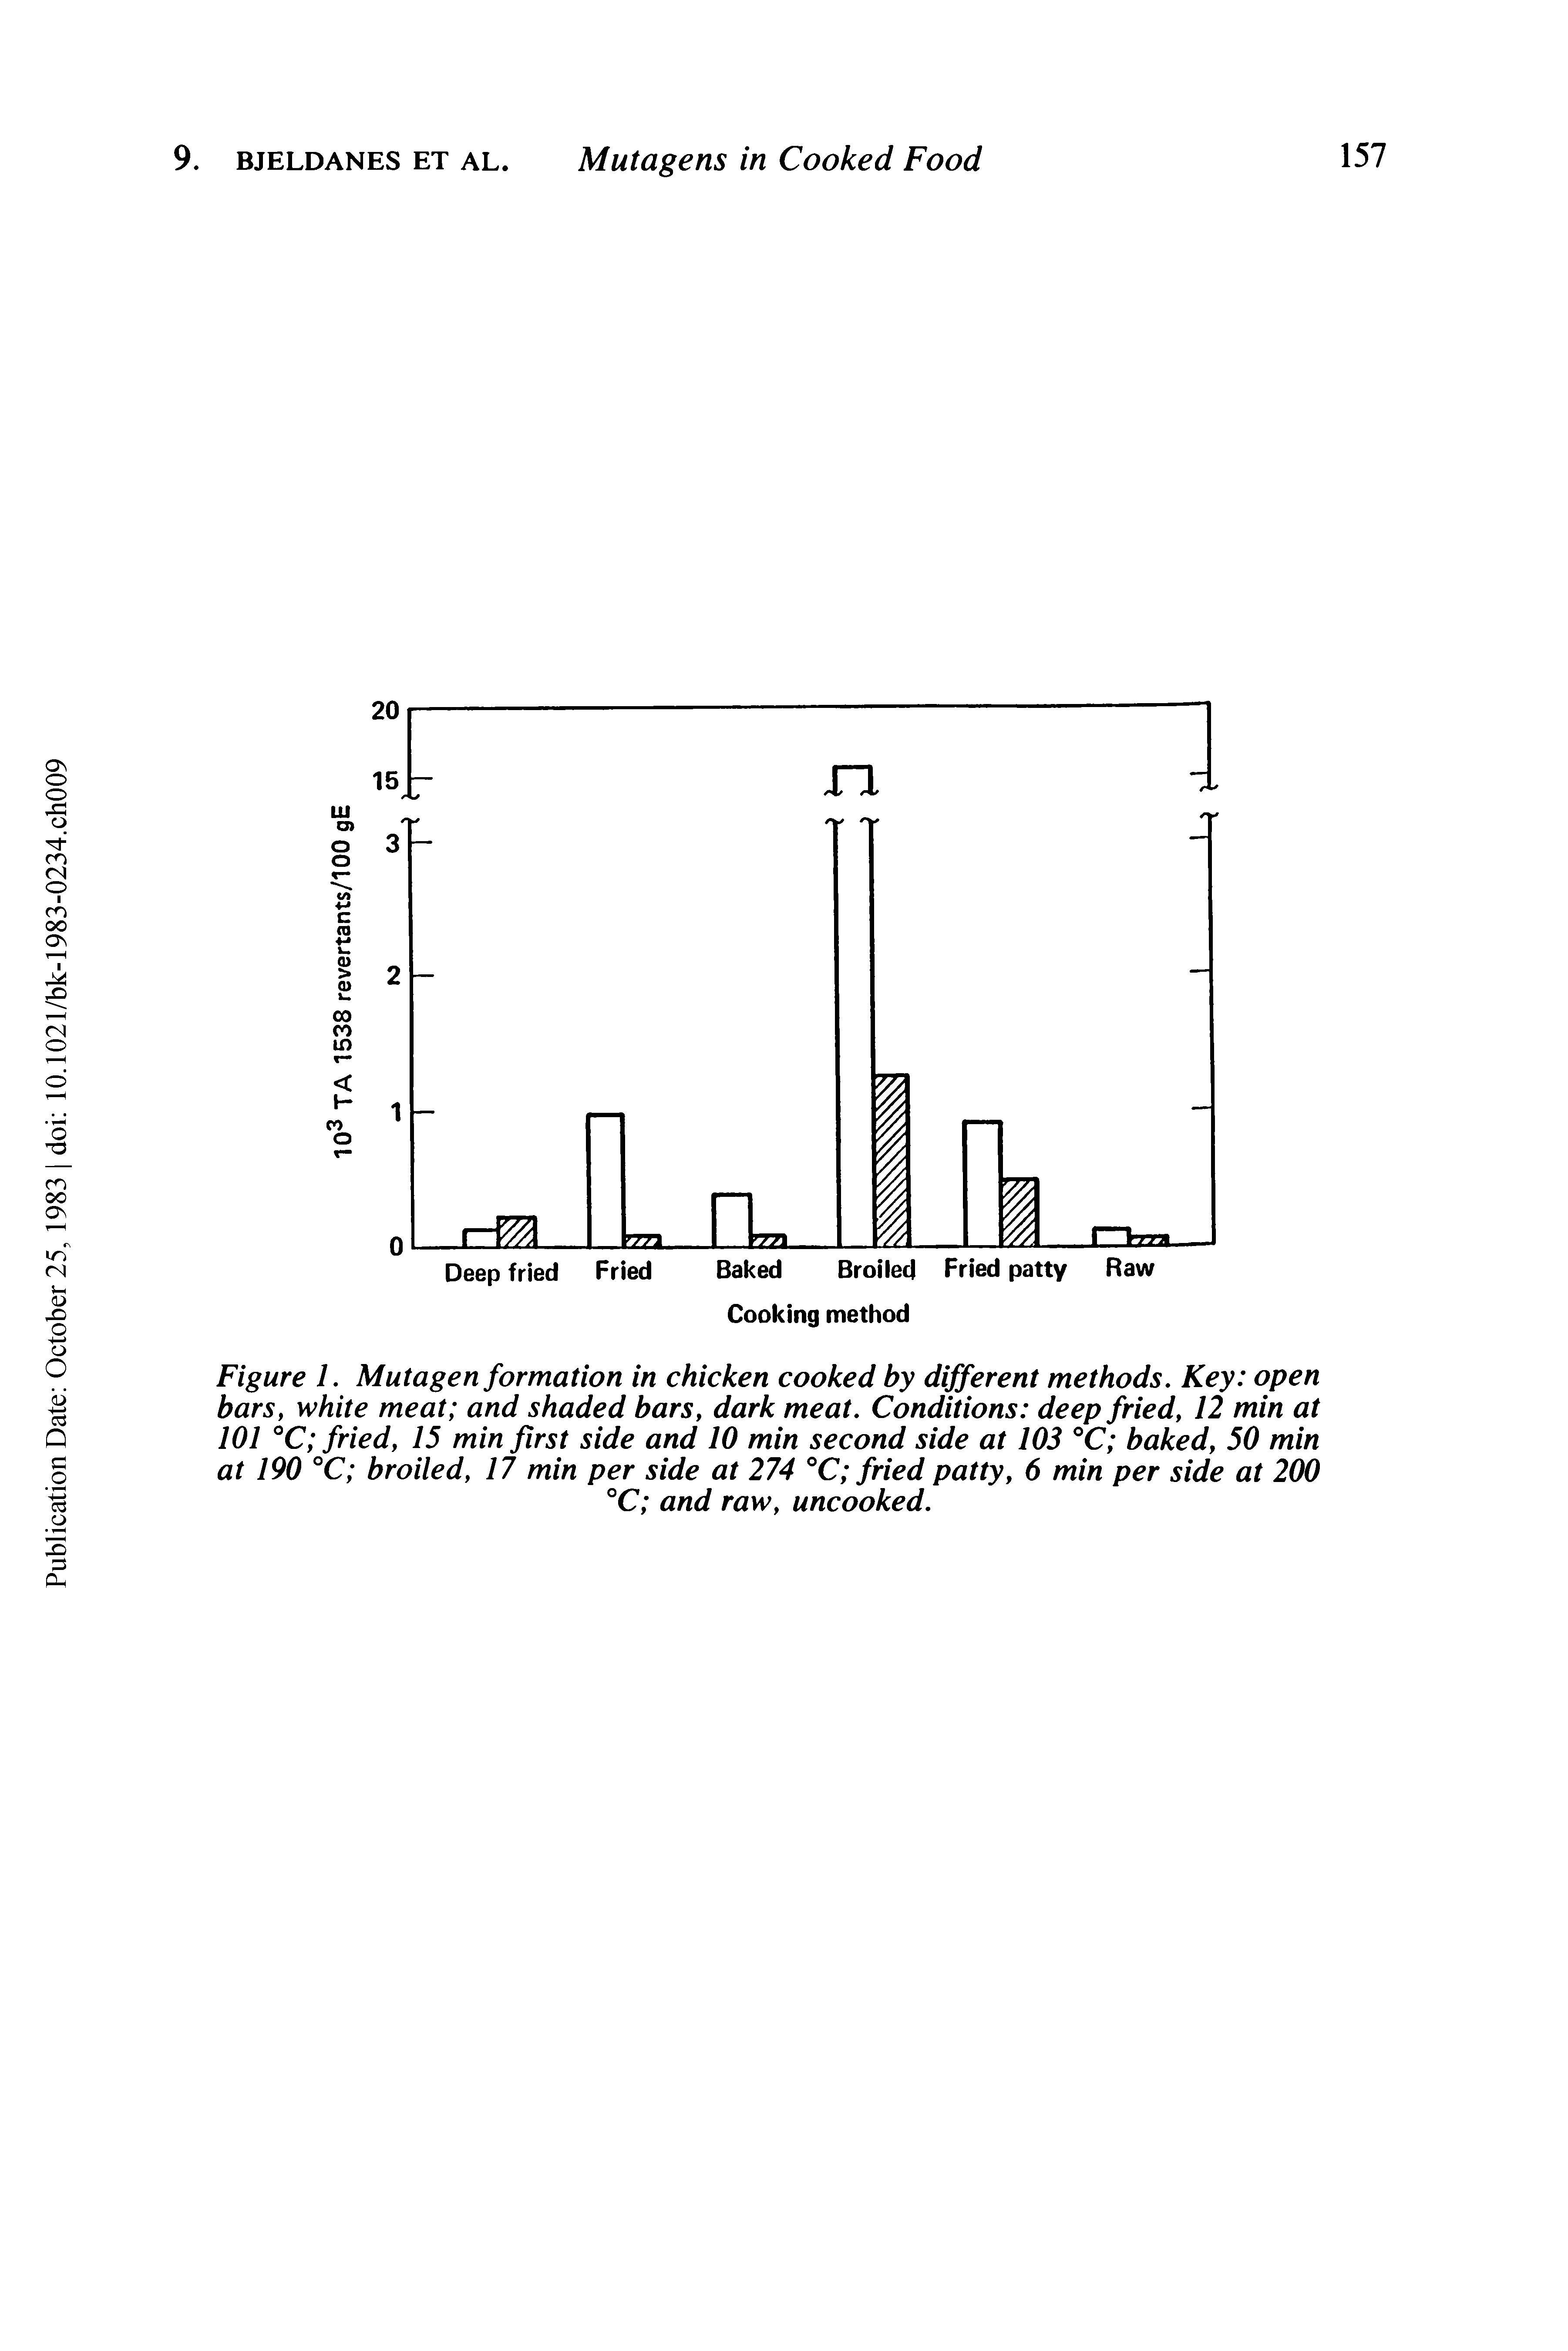 Figure 1. Mutagen formation in chicken cooked by different methods. Key open bars, white meat and shaded bars, dark meat. Conditions deep fried, 12 min at 101 °C fried, 15 min first side and 10 min second side at 103 °C baked, 50 min at 190 °C broiled, 17 min per side at 274 °C fried patty, 6 min per side at 200 °C and raw, uncooked.